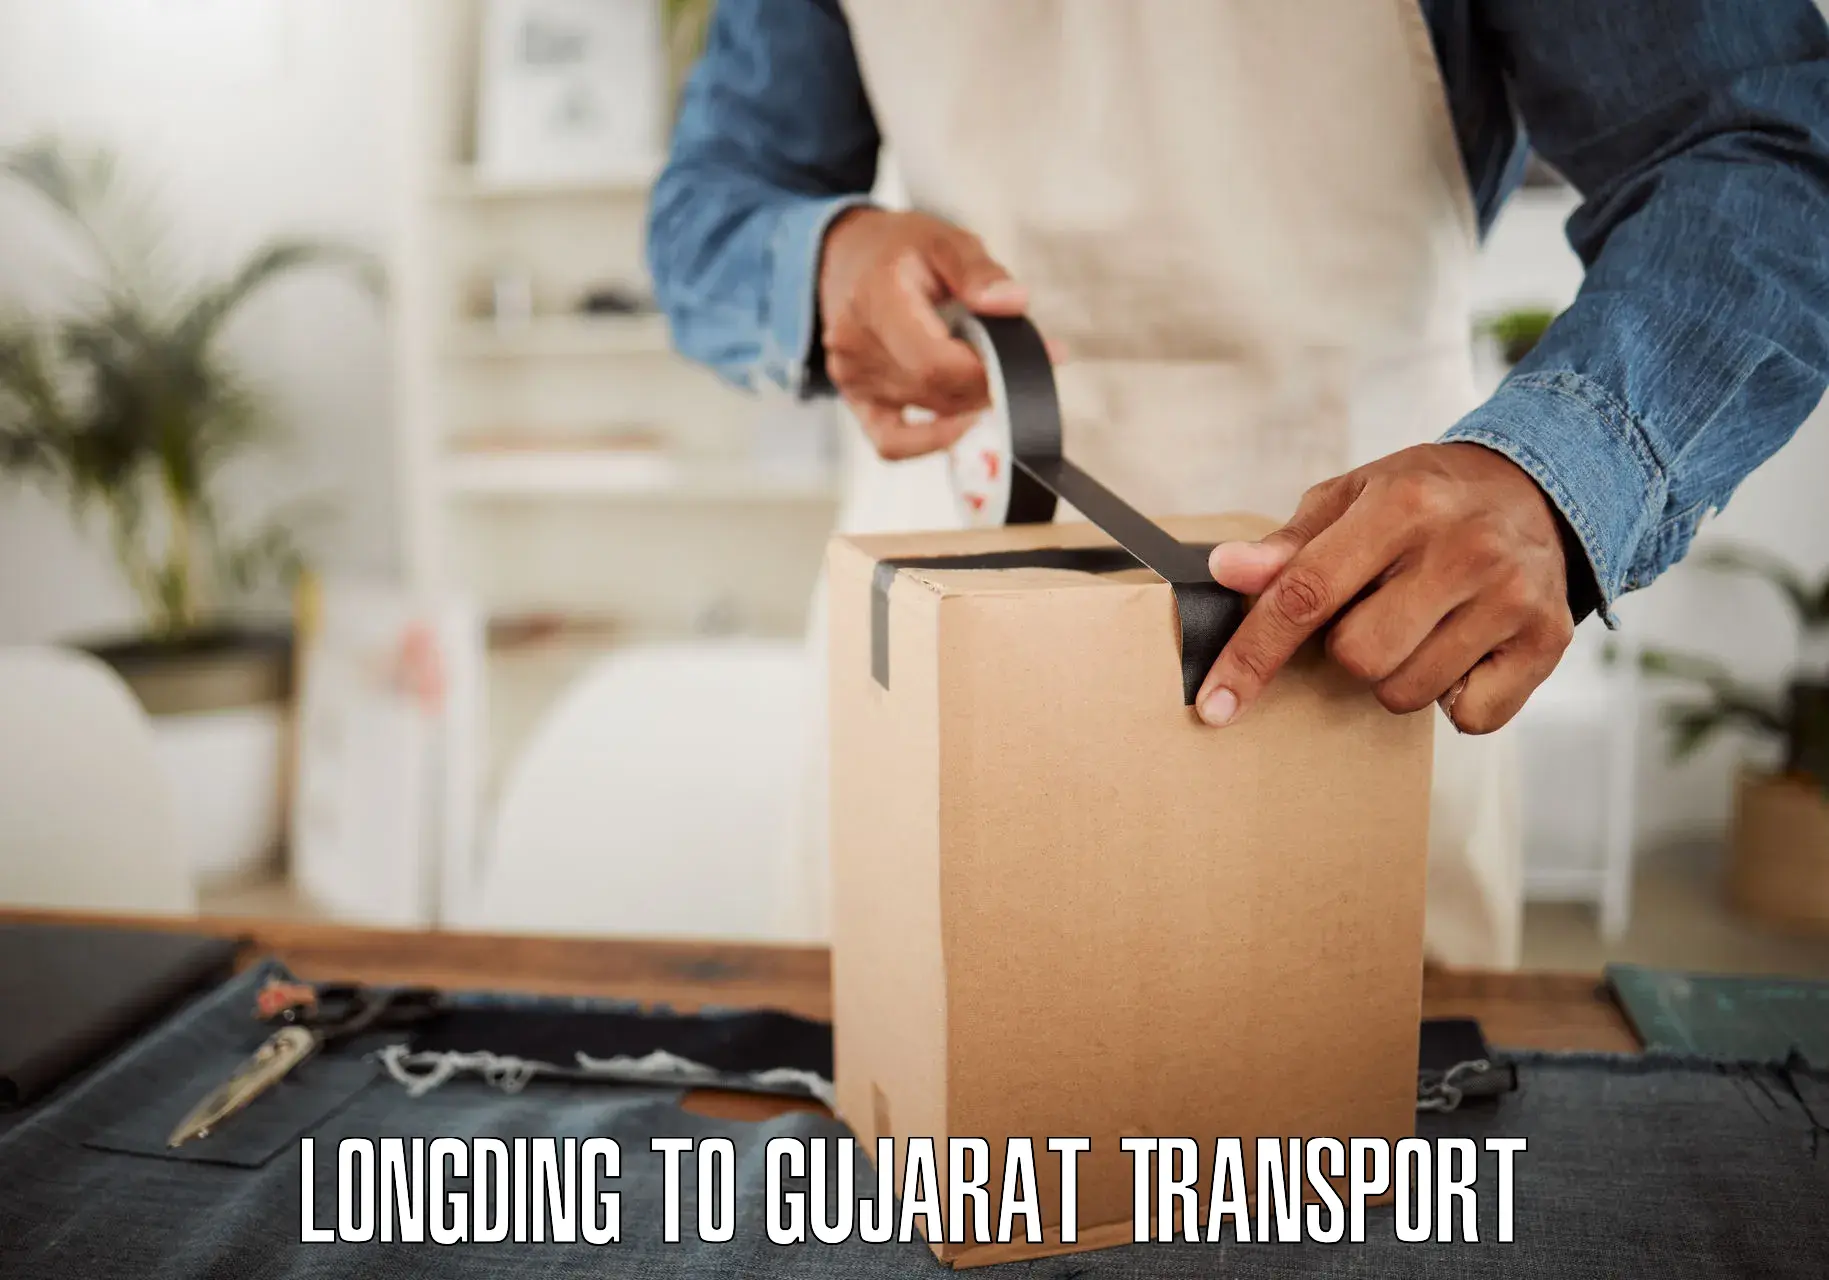 Transport in sharing Longding to Ahmedabad